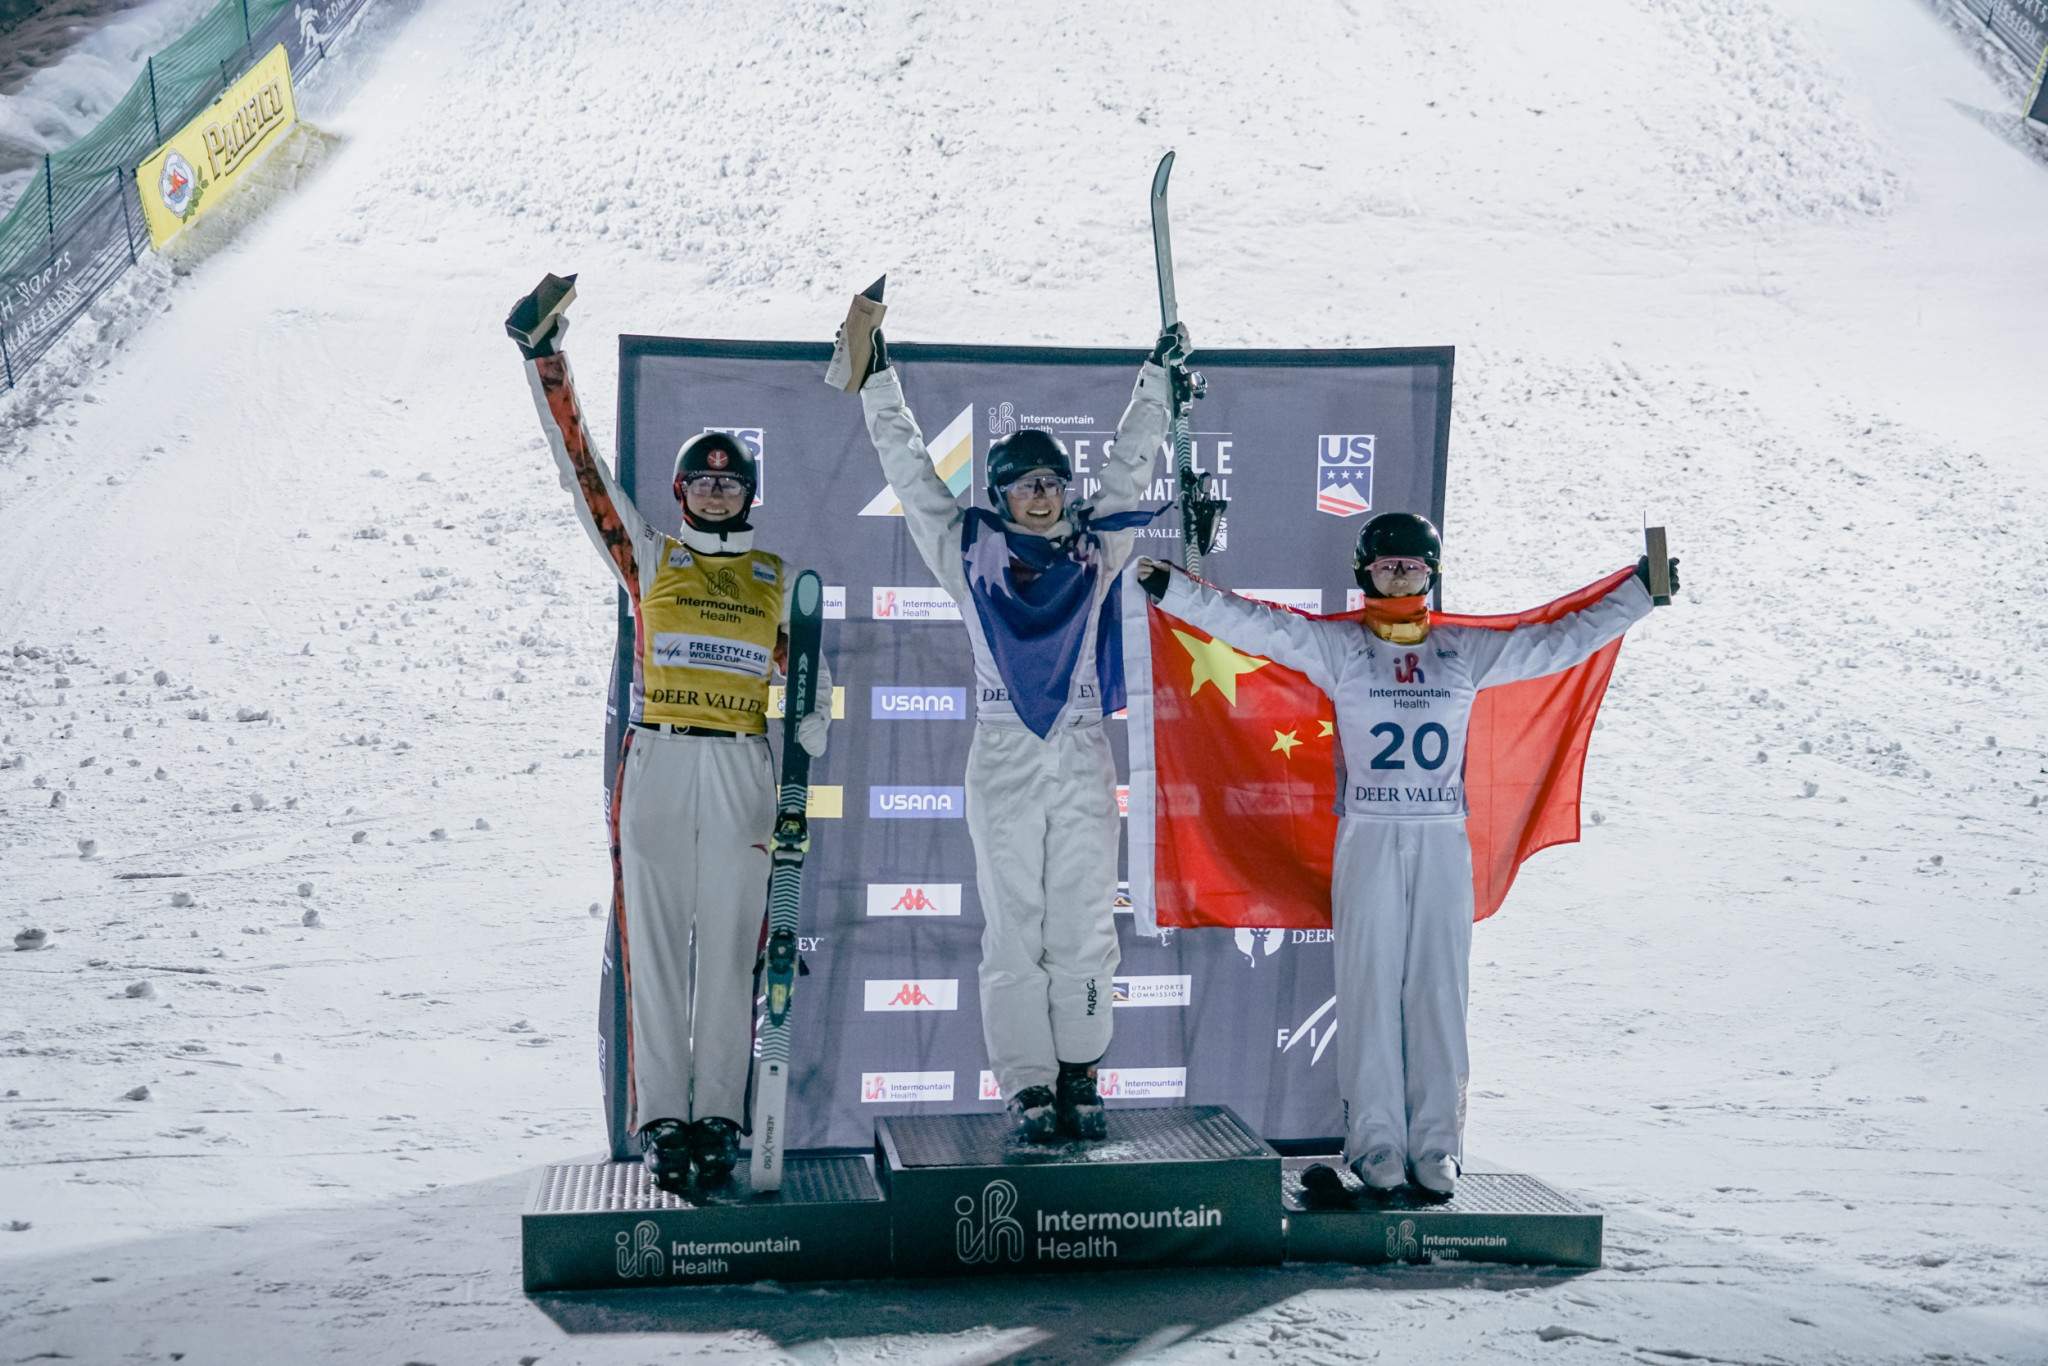 Australia’s Danielle Scott, centre, topped the podium in the aerials competition at the FIS Freestyle Ski World Cup in Deer Valley ©FIS